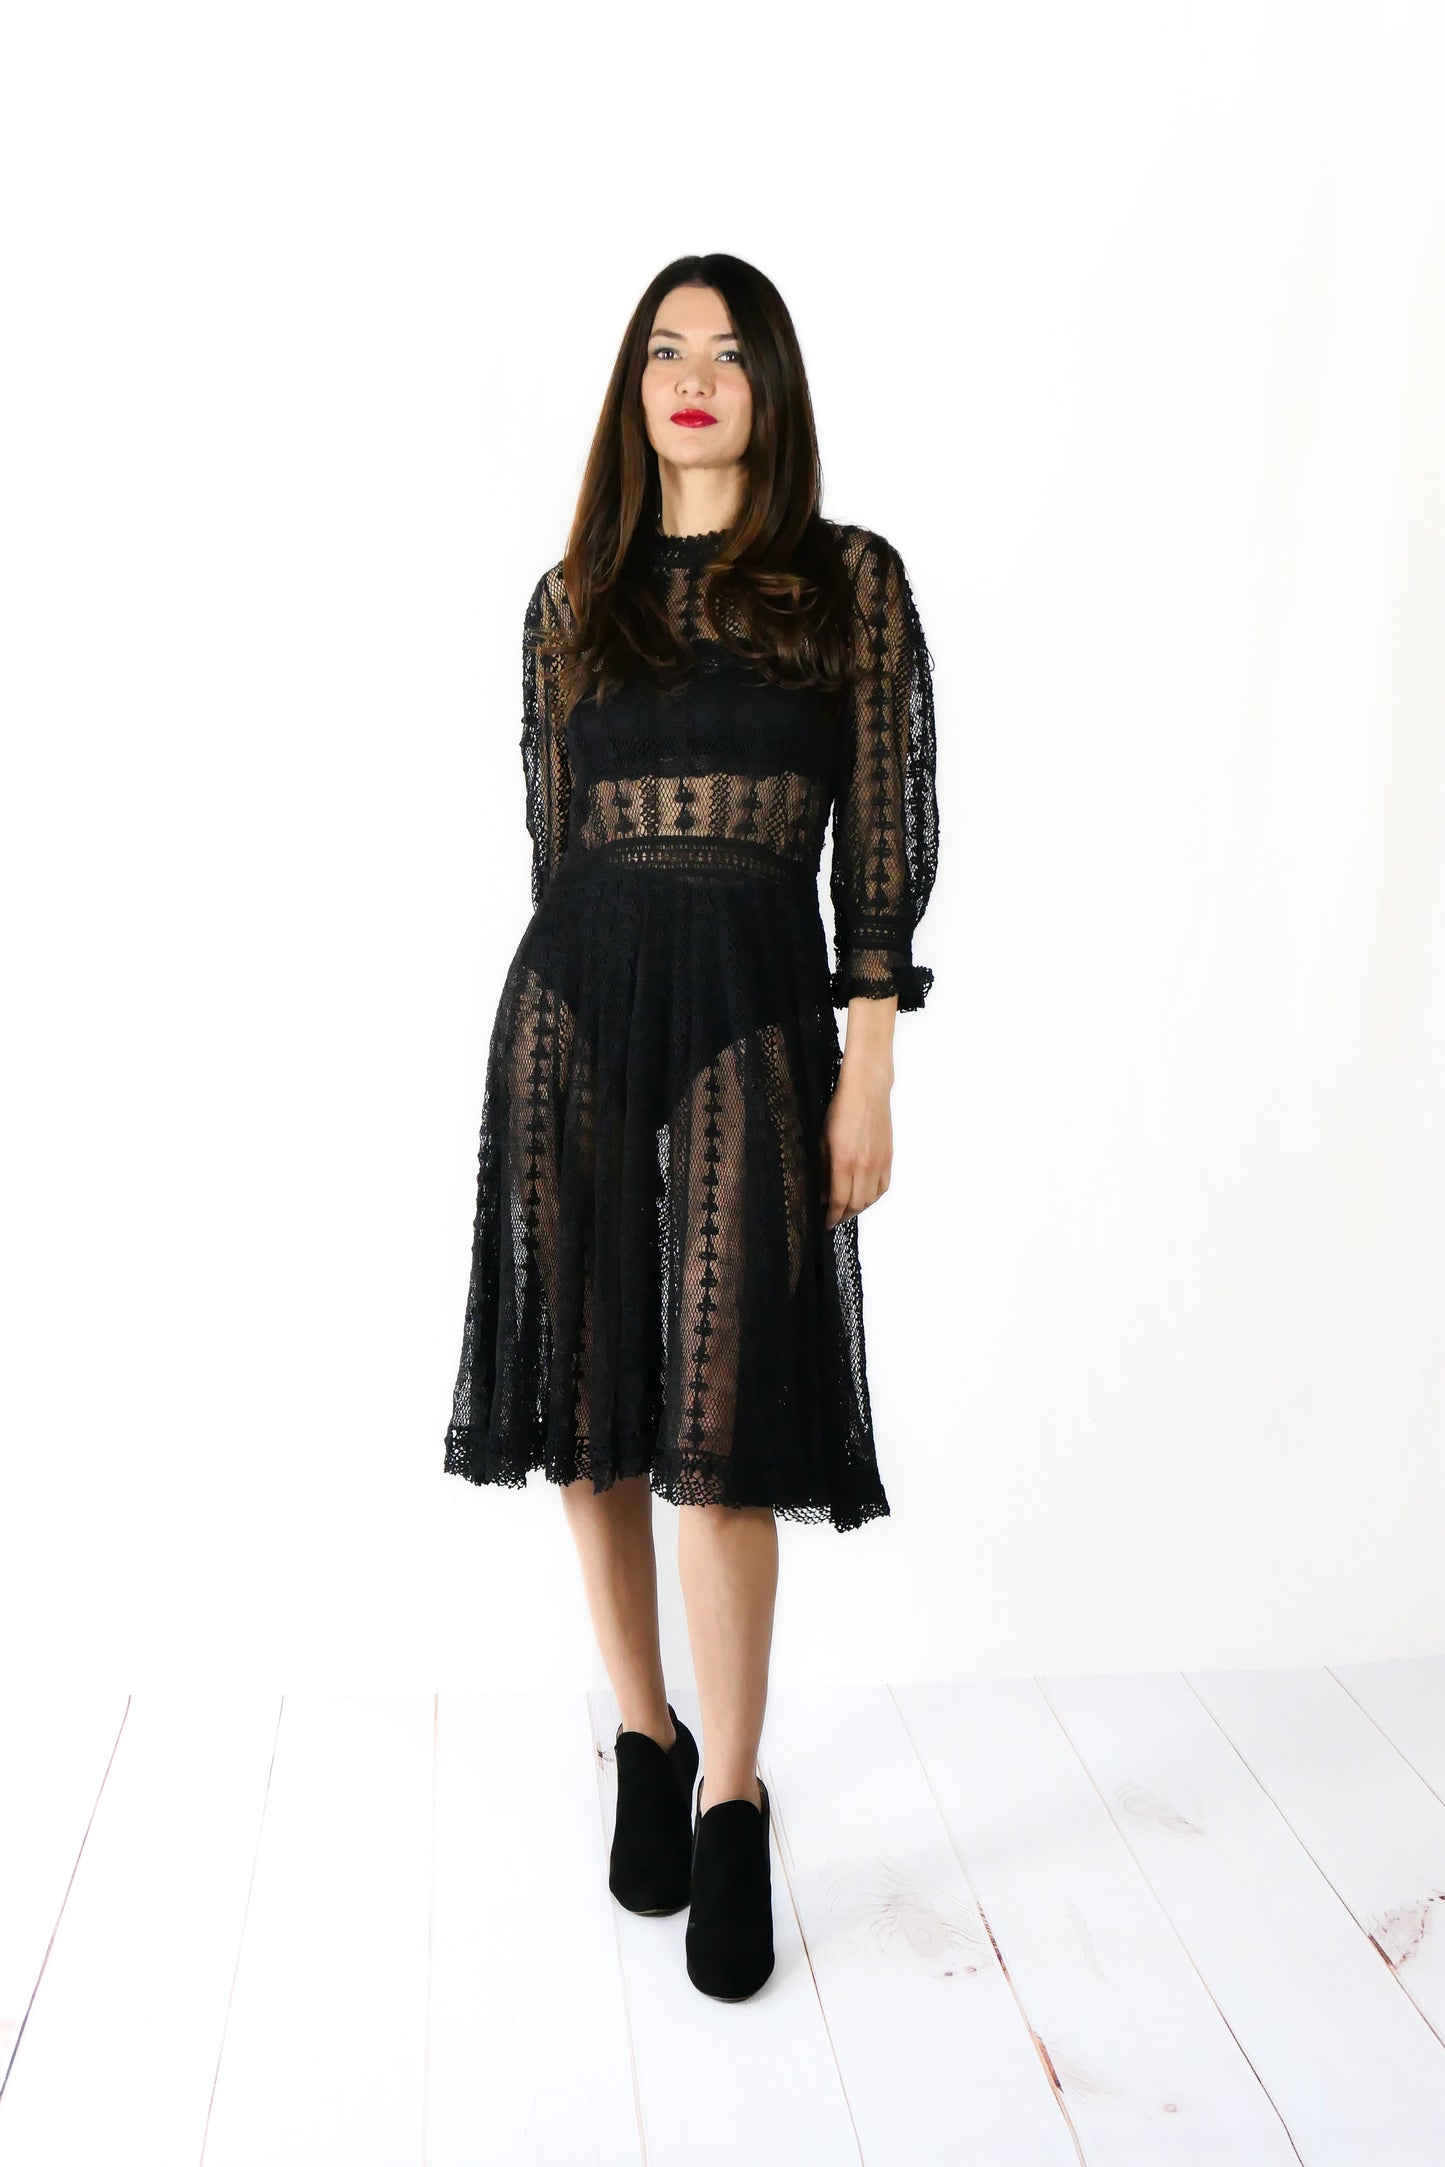 A beguiling black version of our cottage core style midi length crochet dress, this dreamy Lim's original vintage piece from the 1980s is made with very fine threads, creating a refined and sheer look. Detailed crochet trim is used at the waist, hemline, and 3/4 length ruffled sleeves. Measurements: Bust 36” Waist 30” Length 42” Shoulder width 15” Sleeve 20” Cuff circumference 9" Color: Black